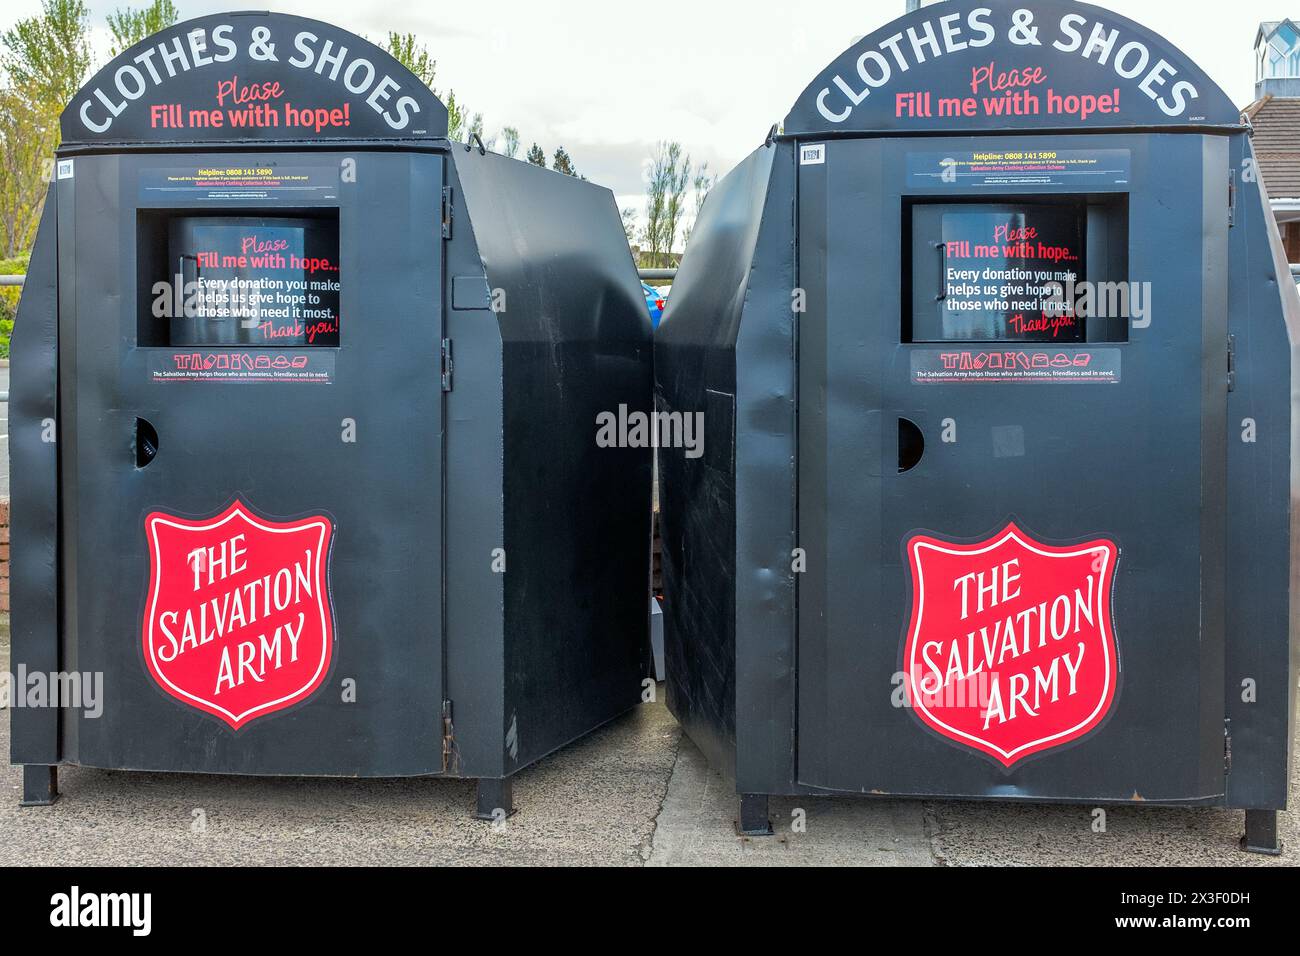 Salvation Army charity clothes and shoes bin, Ayr, Ayrshire, Scotland, Stock Photo